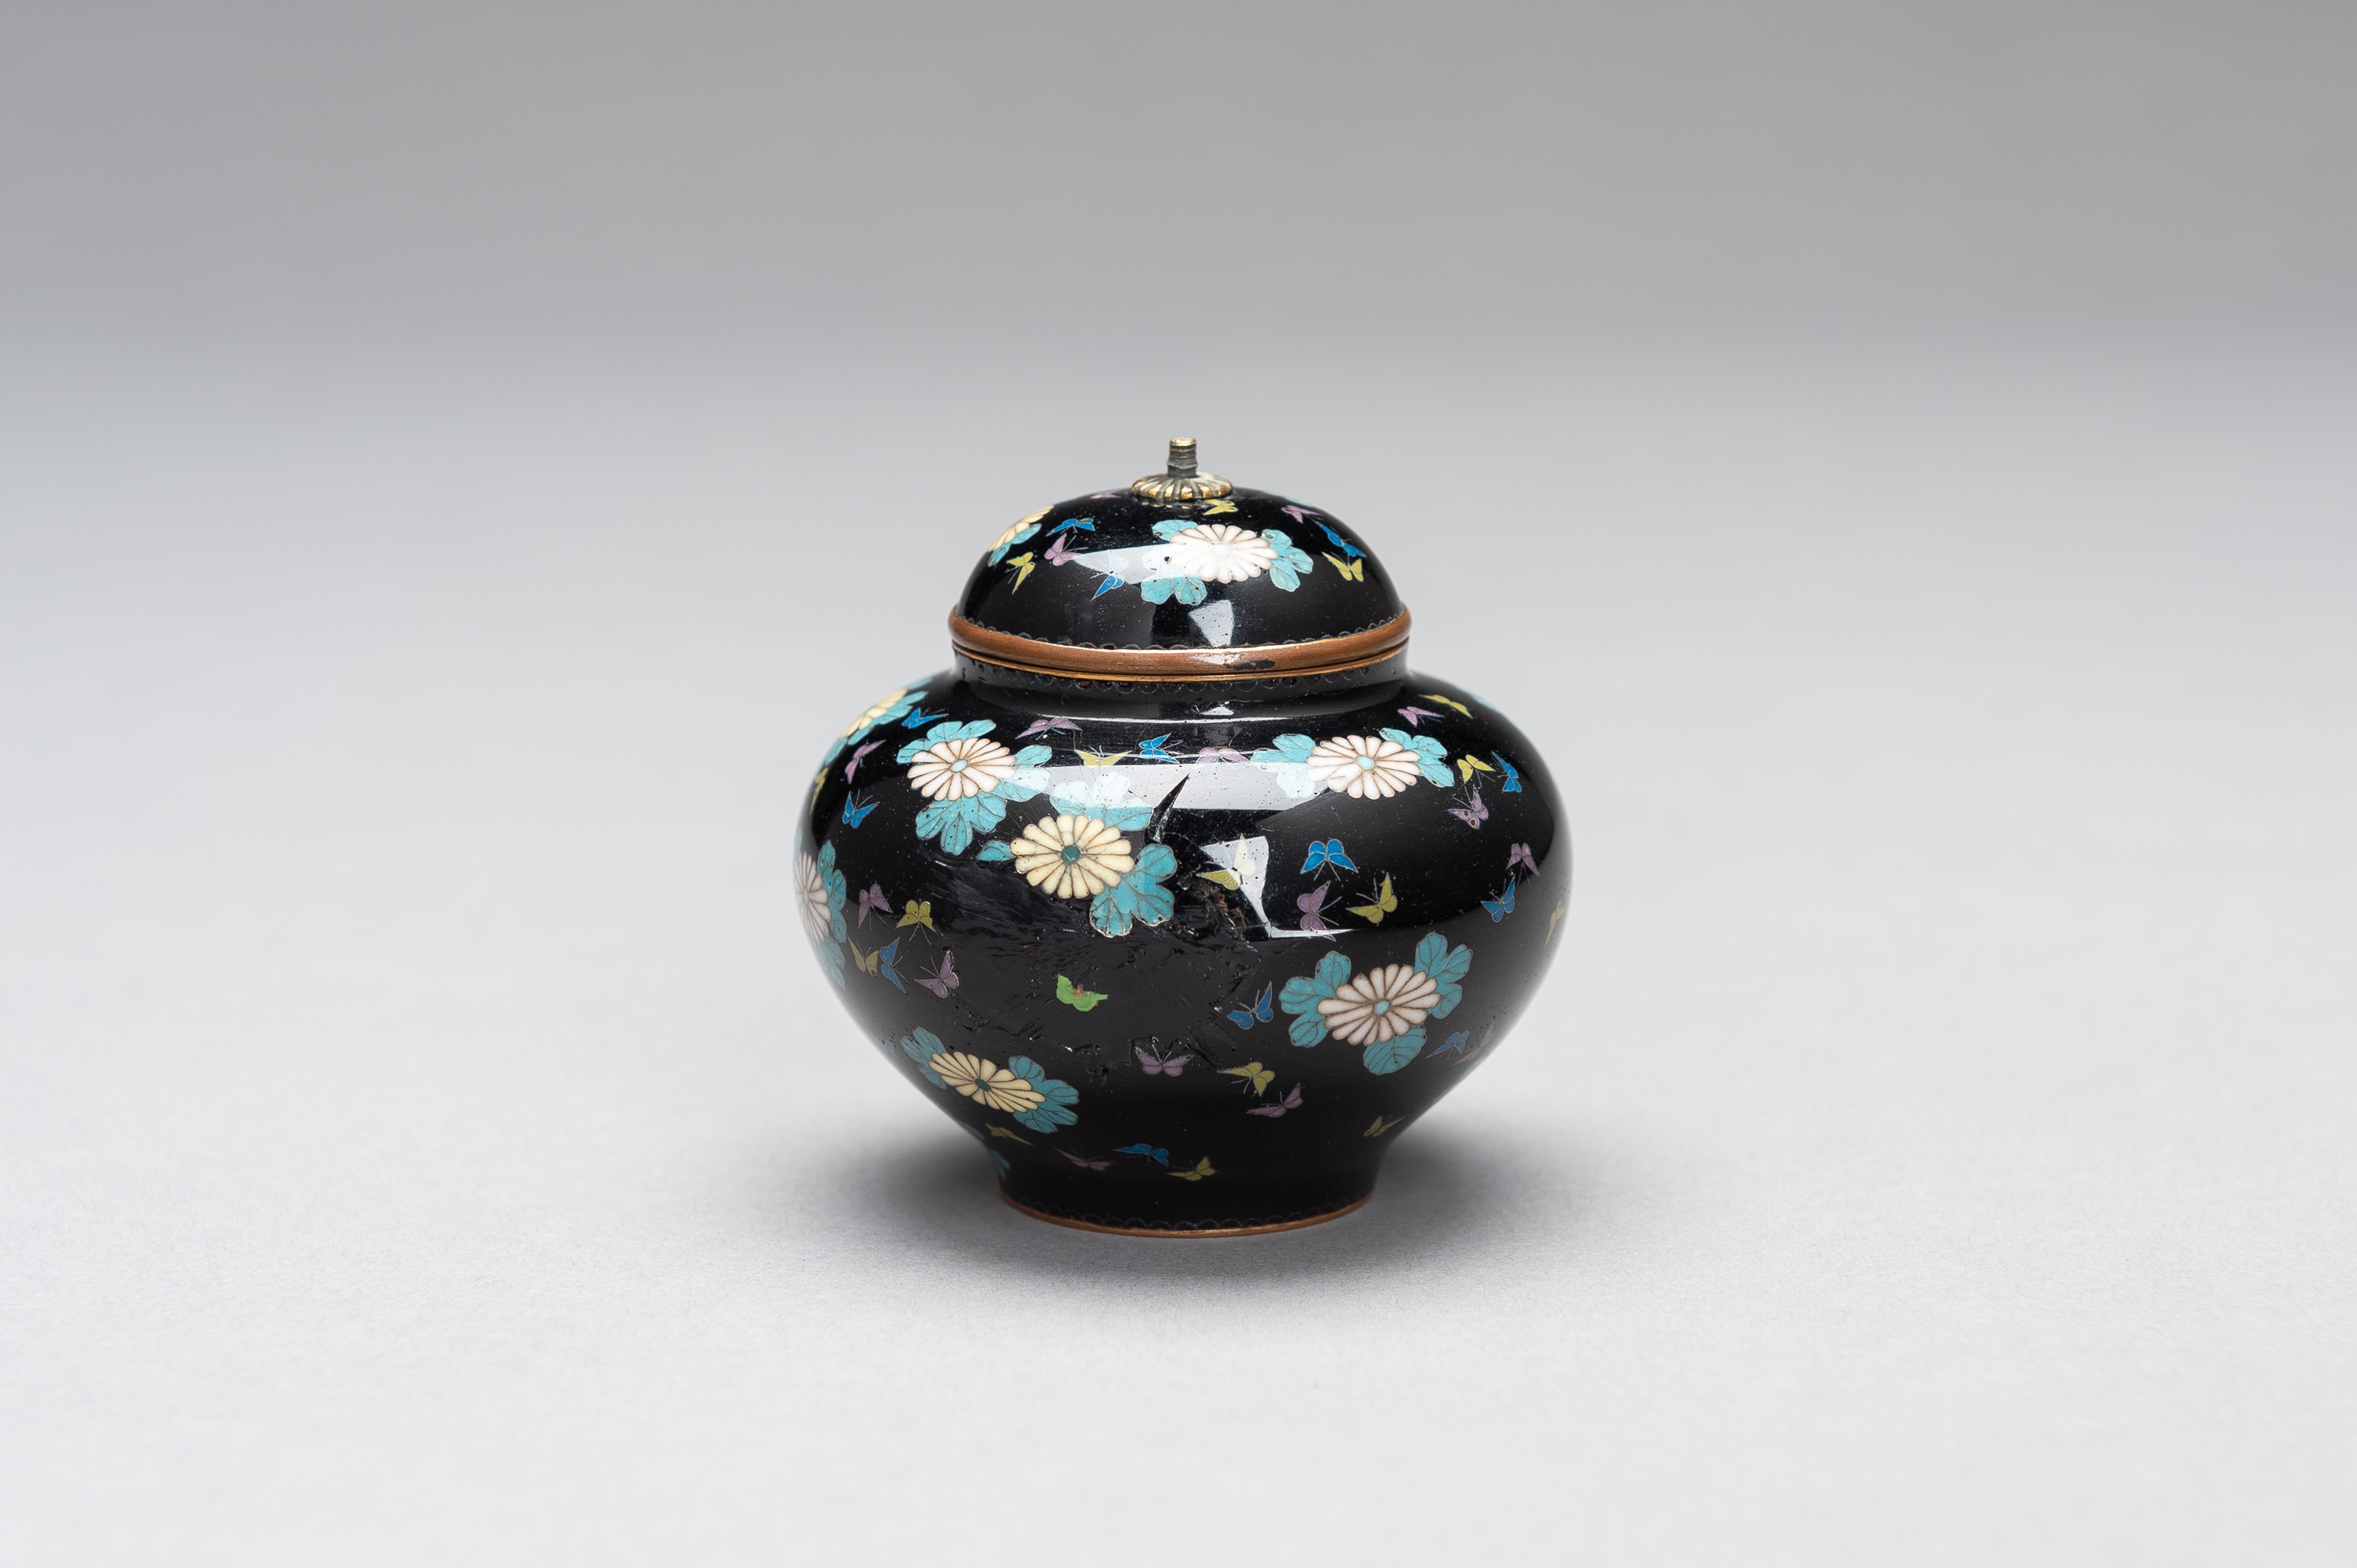 A CLOISONNE ENAMEL MINIATURE VASE WITH COVER - Image 4 of 9